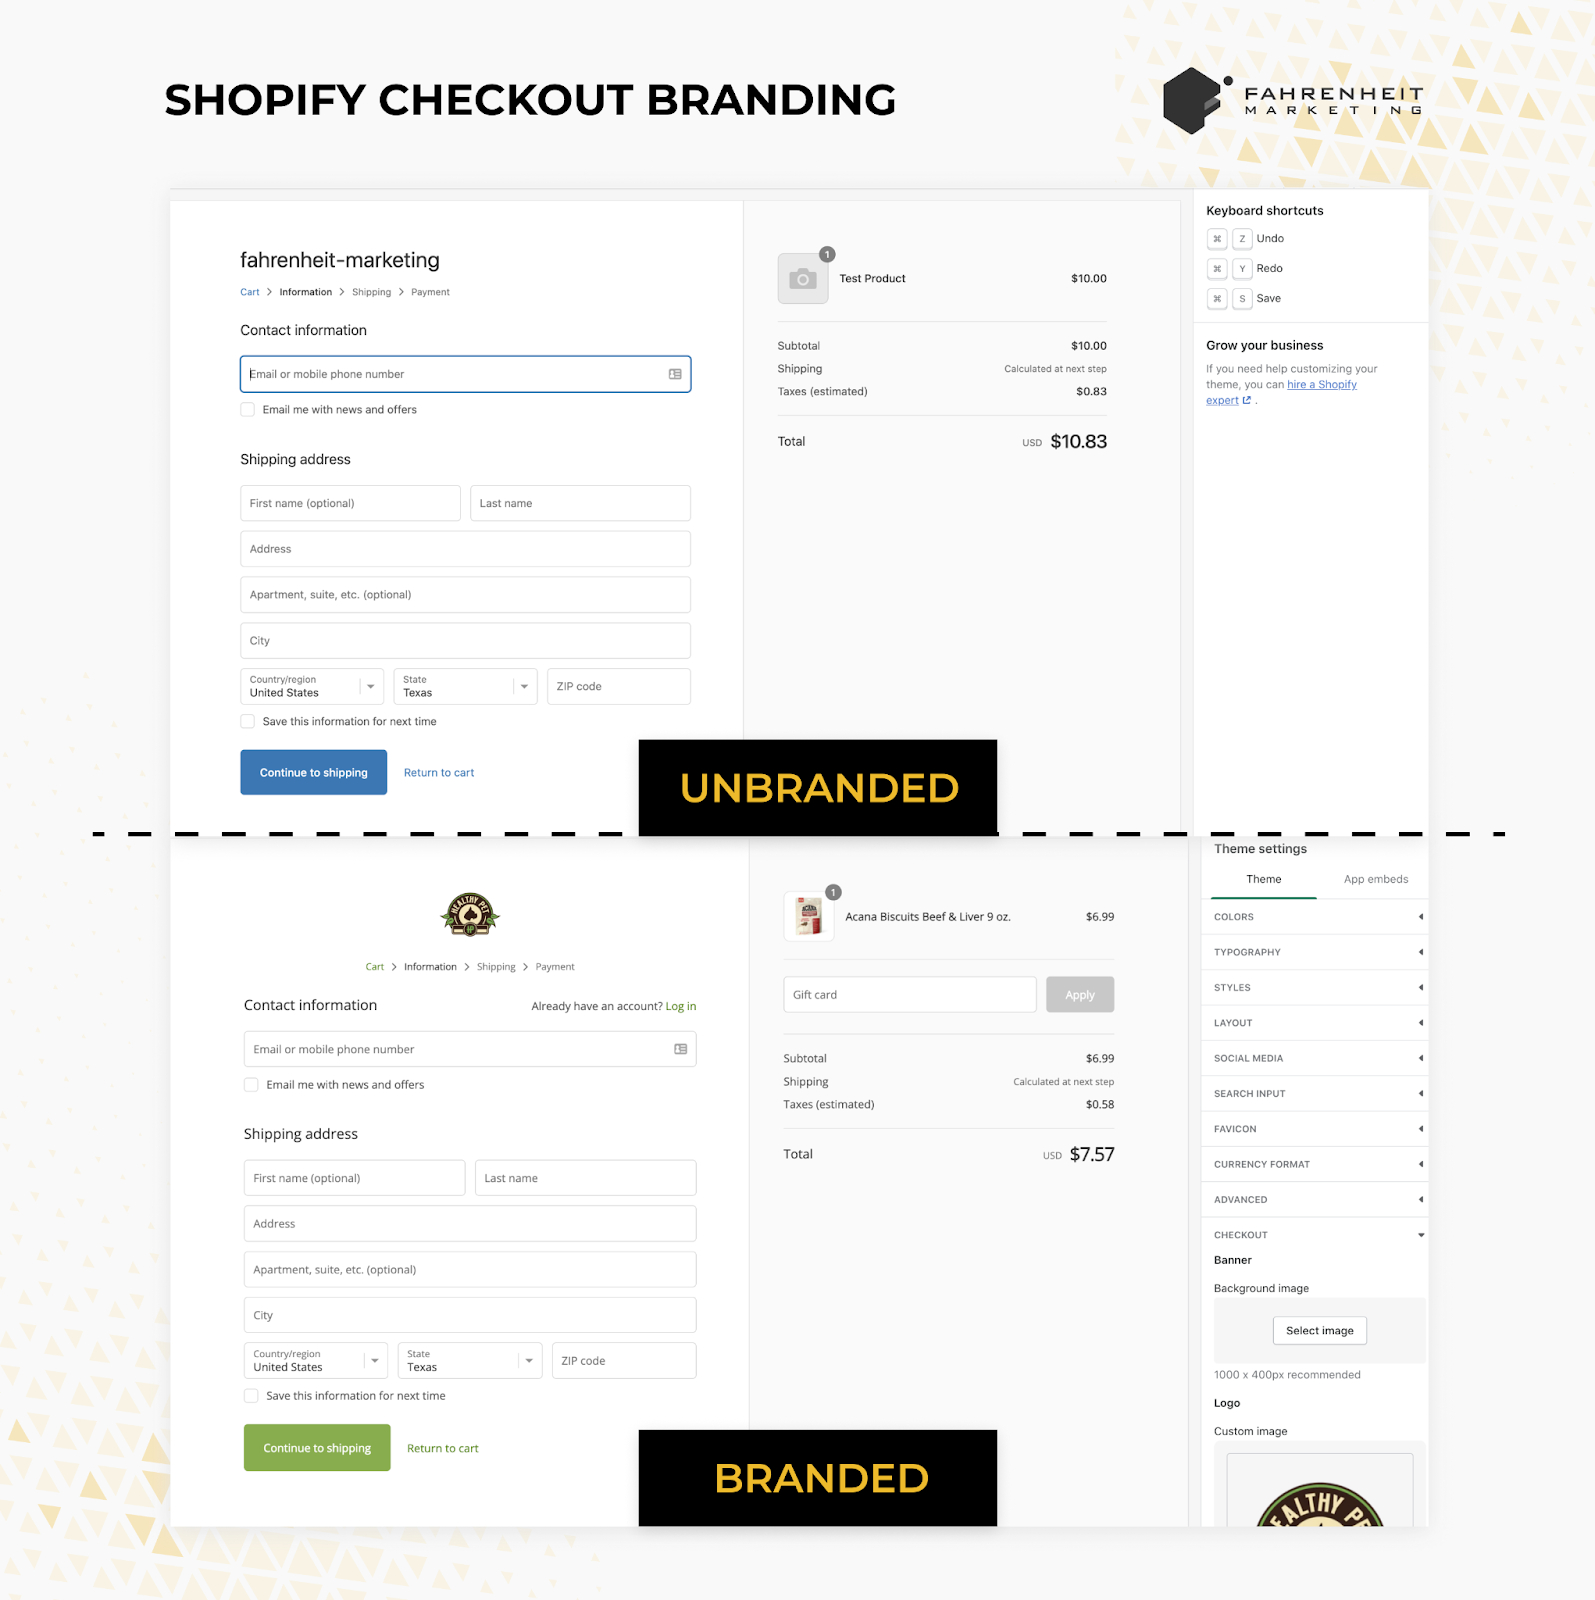 How to Customize the Shopify Checkout Experience